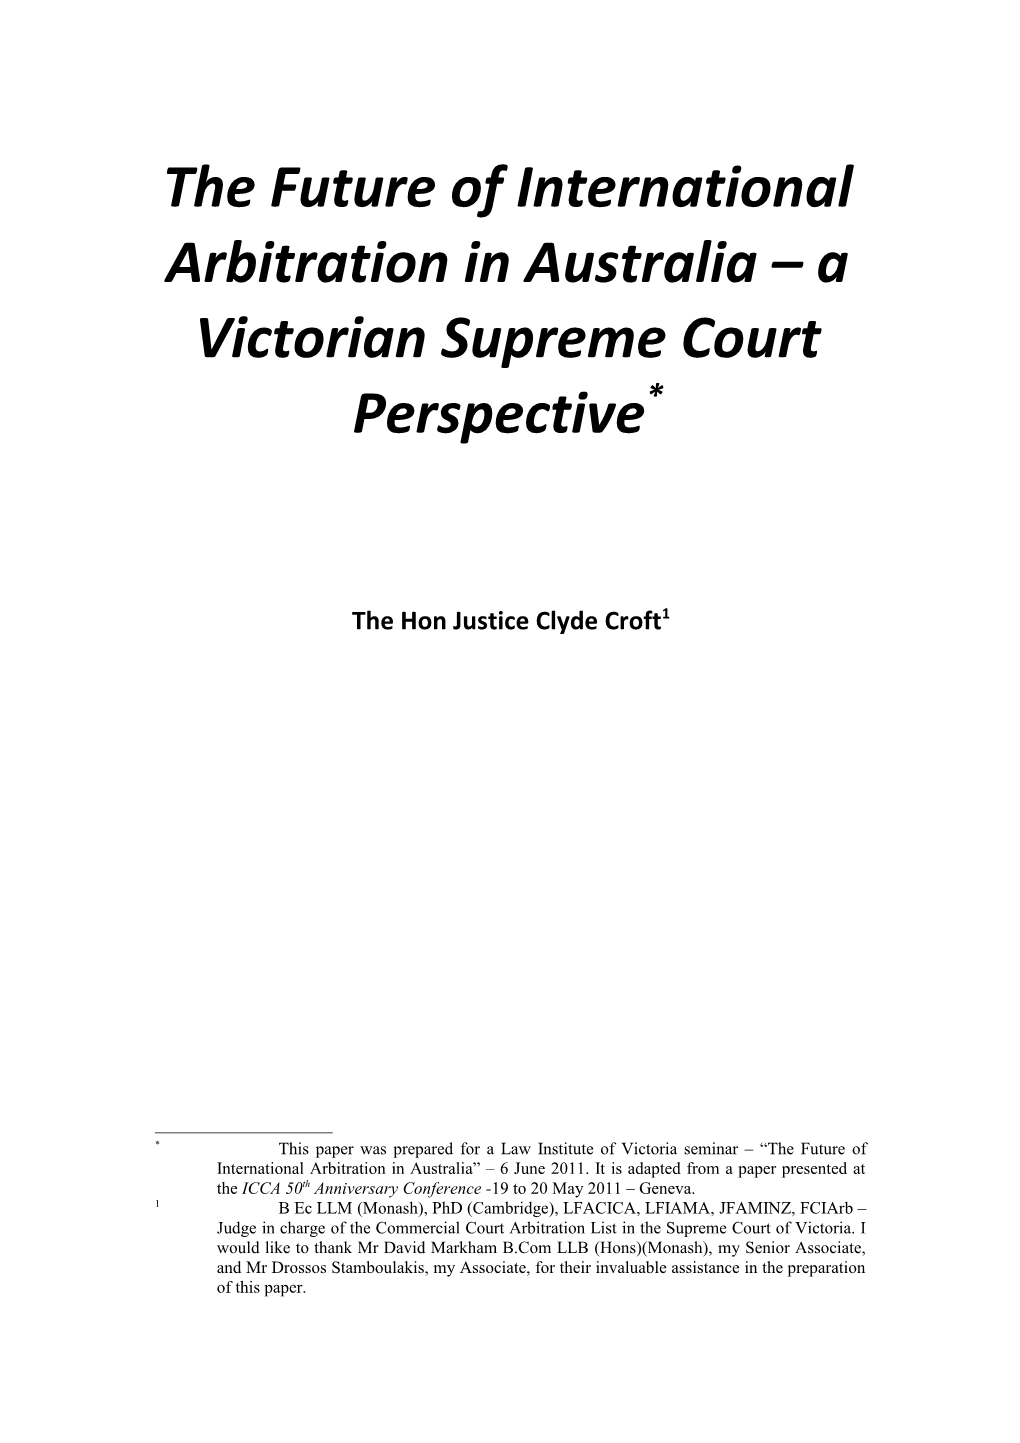 The Future of International Arbitration in Australia a Victorian Supreme Court Perspective